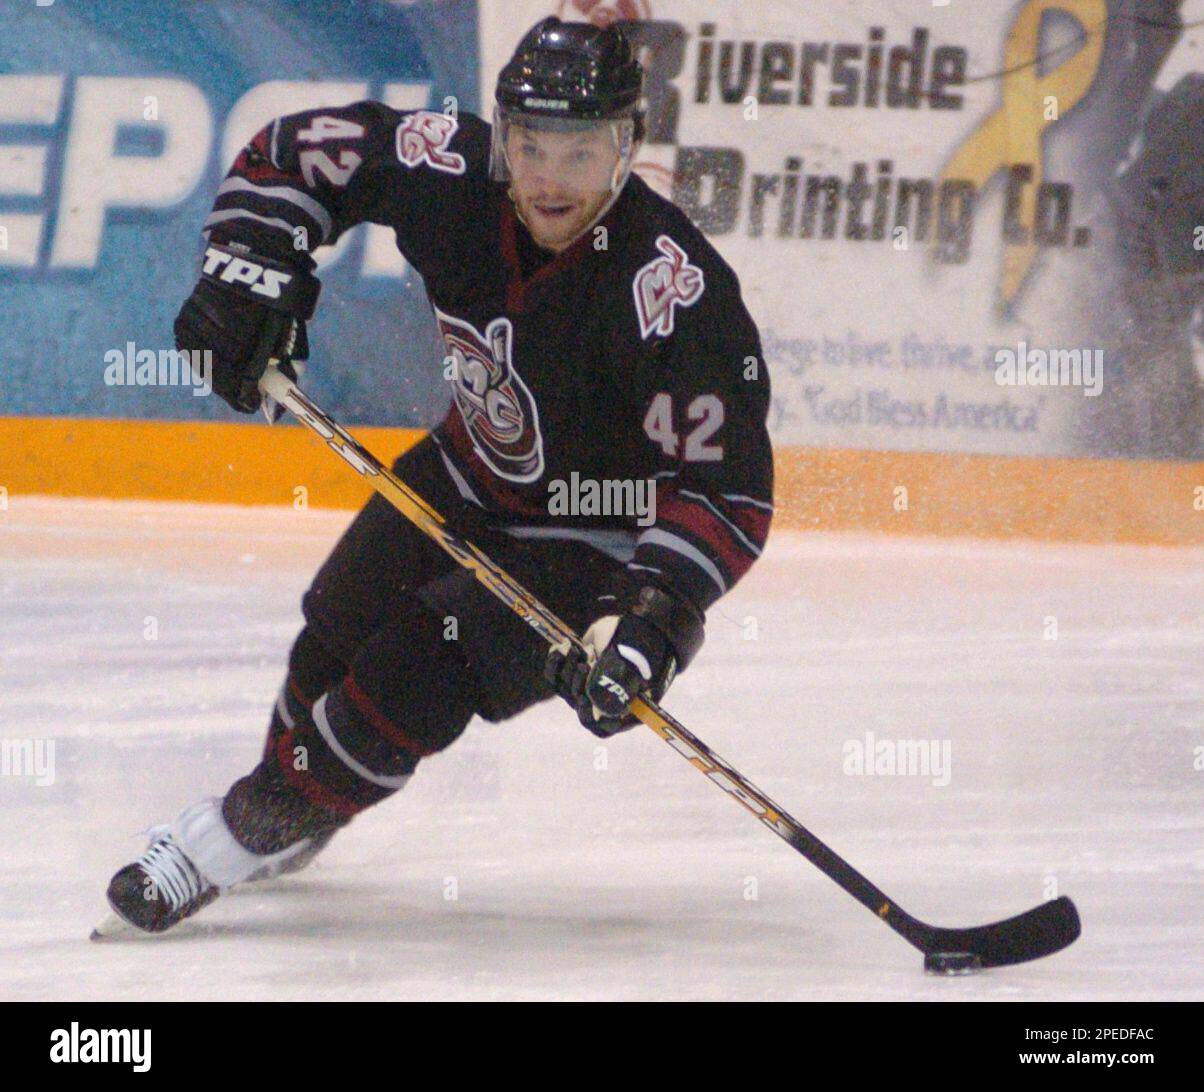 https://c8.alamy.com/comp/2PEDFAC/motor-city-mechanics-sean-avery-skates-with-the-puck-against-the-port-huron-beacons-friday-feb-11-2005-in-port-huron-mich-the-united-hockey-league-mechanics-signed-nhl-players-avery-who-plays-for-the-los-angeles-kings-and-bryan-smolinski-of-the-ottawa-senators-friday-on-the-149th-day-of-the-lockout-avery-scored-two-goals-to-lift-the-mechanics-to-a-3-2-win-ap-phototimes-herald-j-douglas-brooks-2PEDFAC.jpg